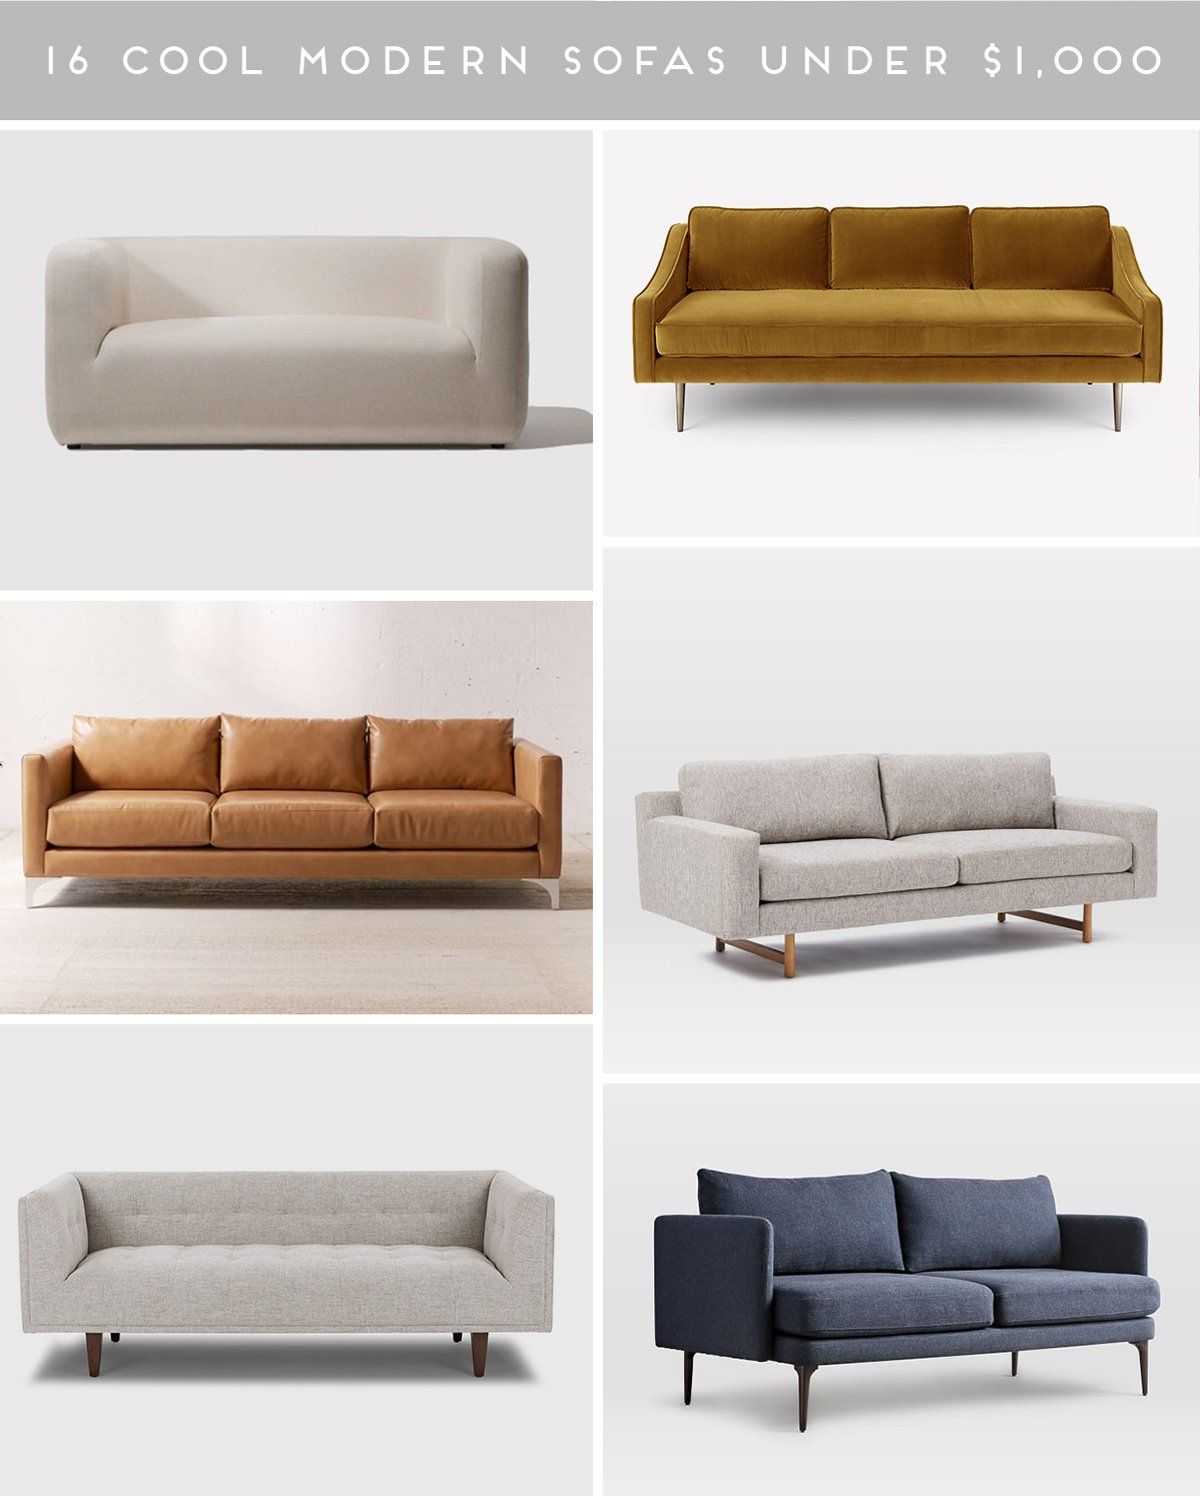 Couch Potato: 16 Stylish Modern Sofas Under $1,000 – Paper And Stitch Inside Modern Loveseat Sofas (View 14 of 15)